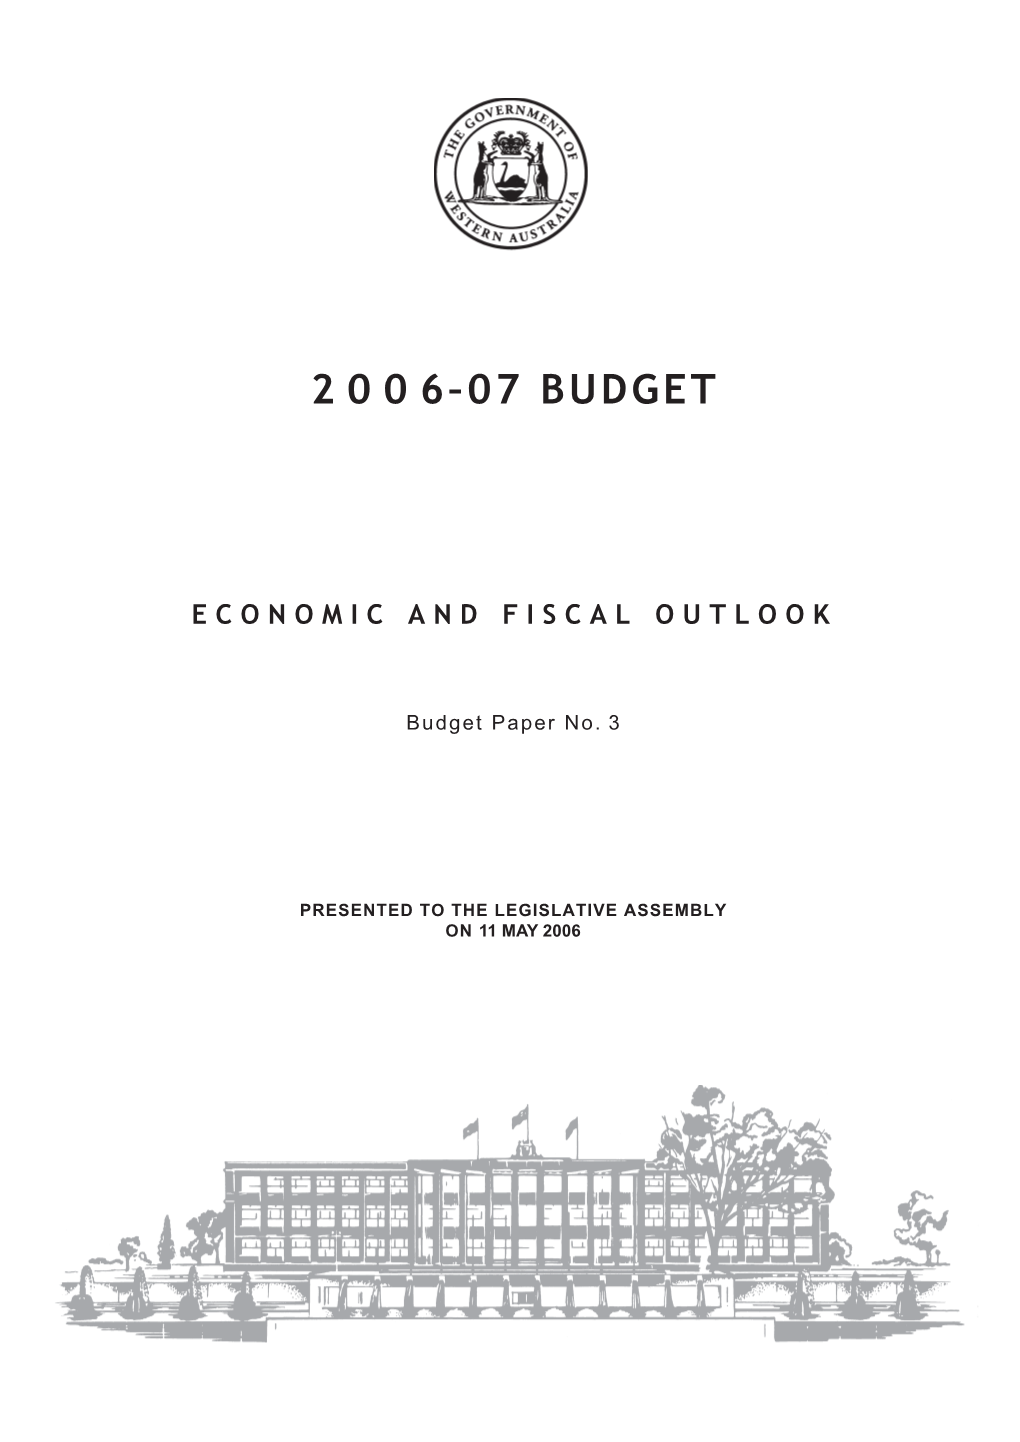 Economic and Fiscal Outlook